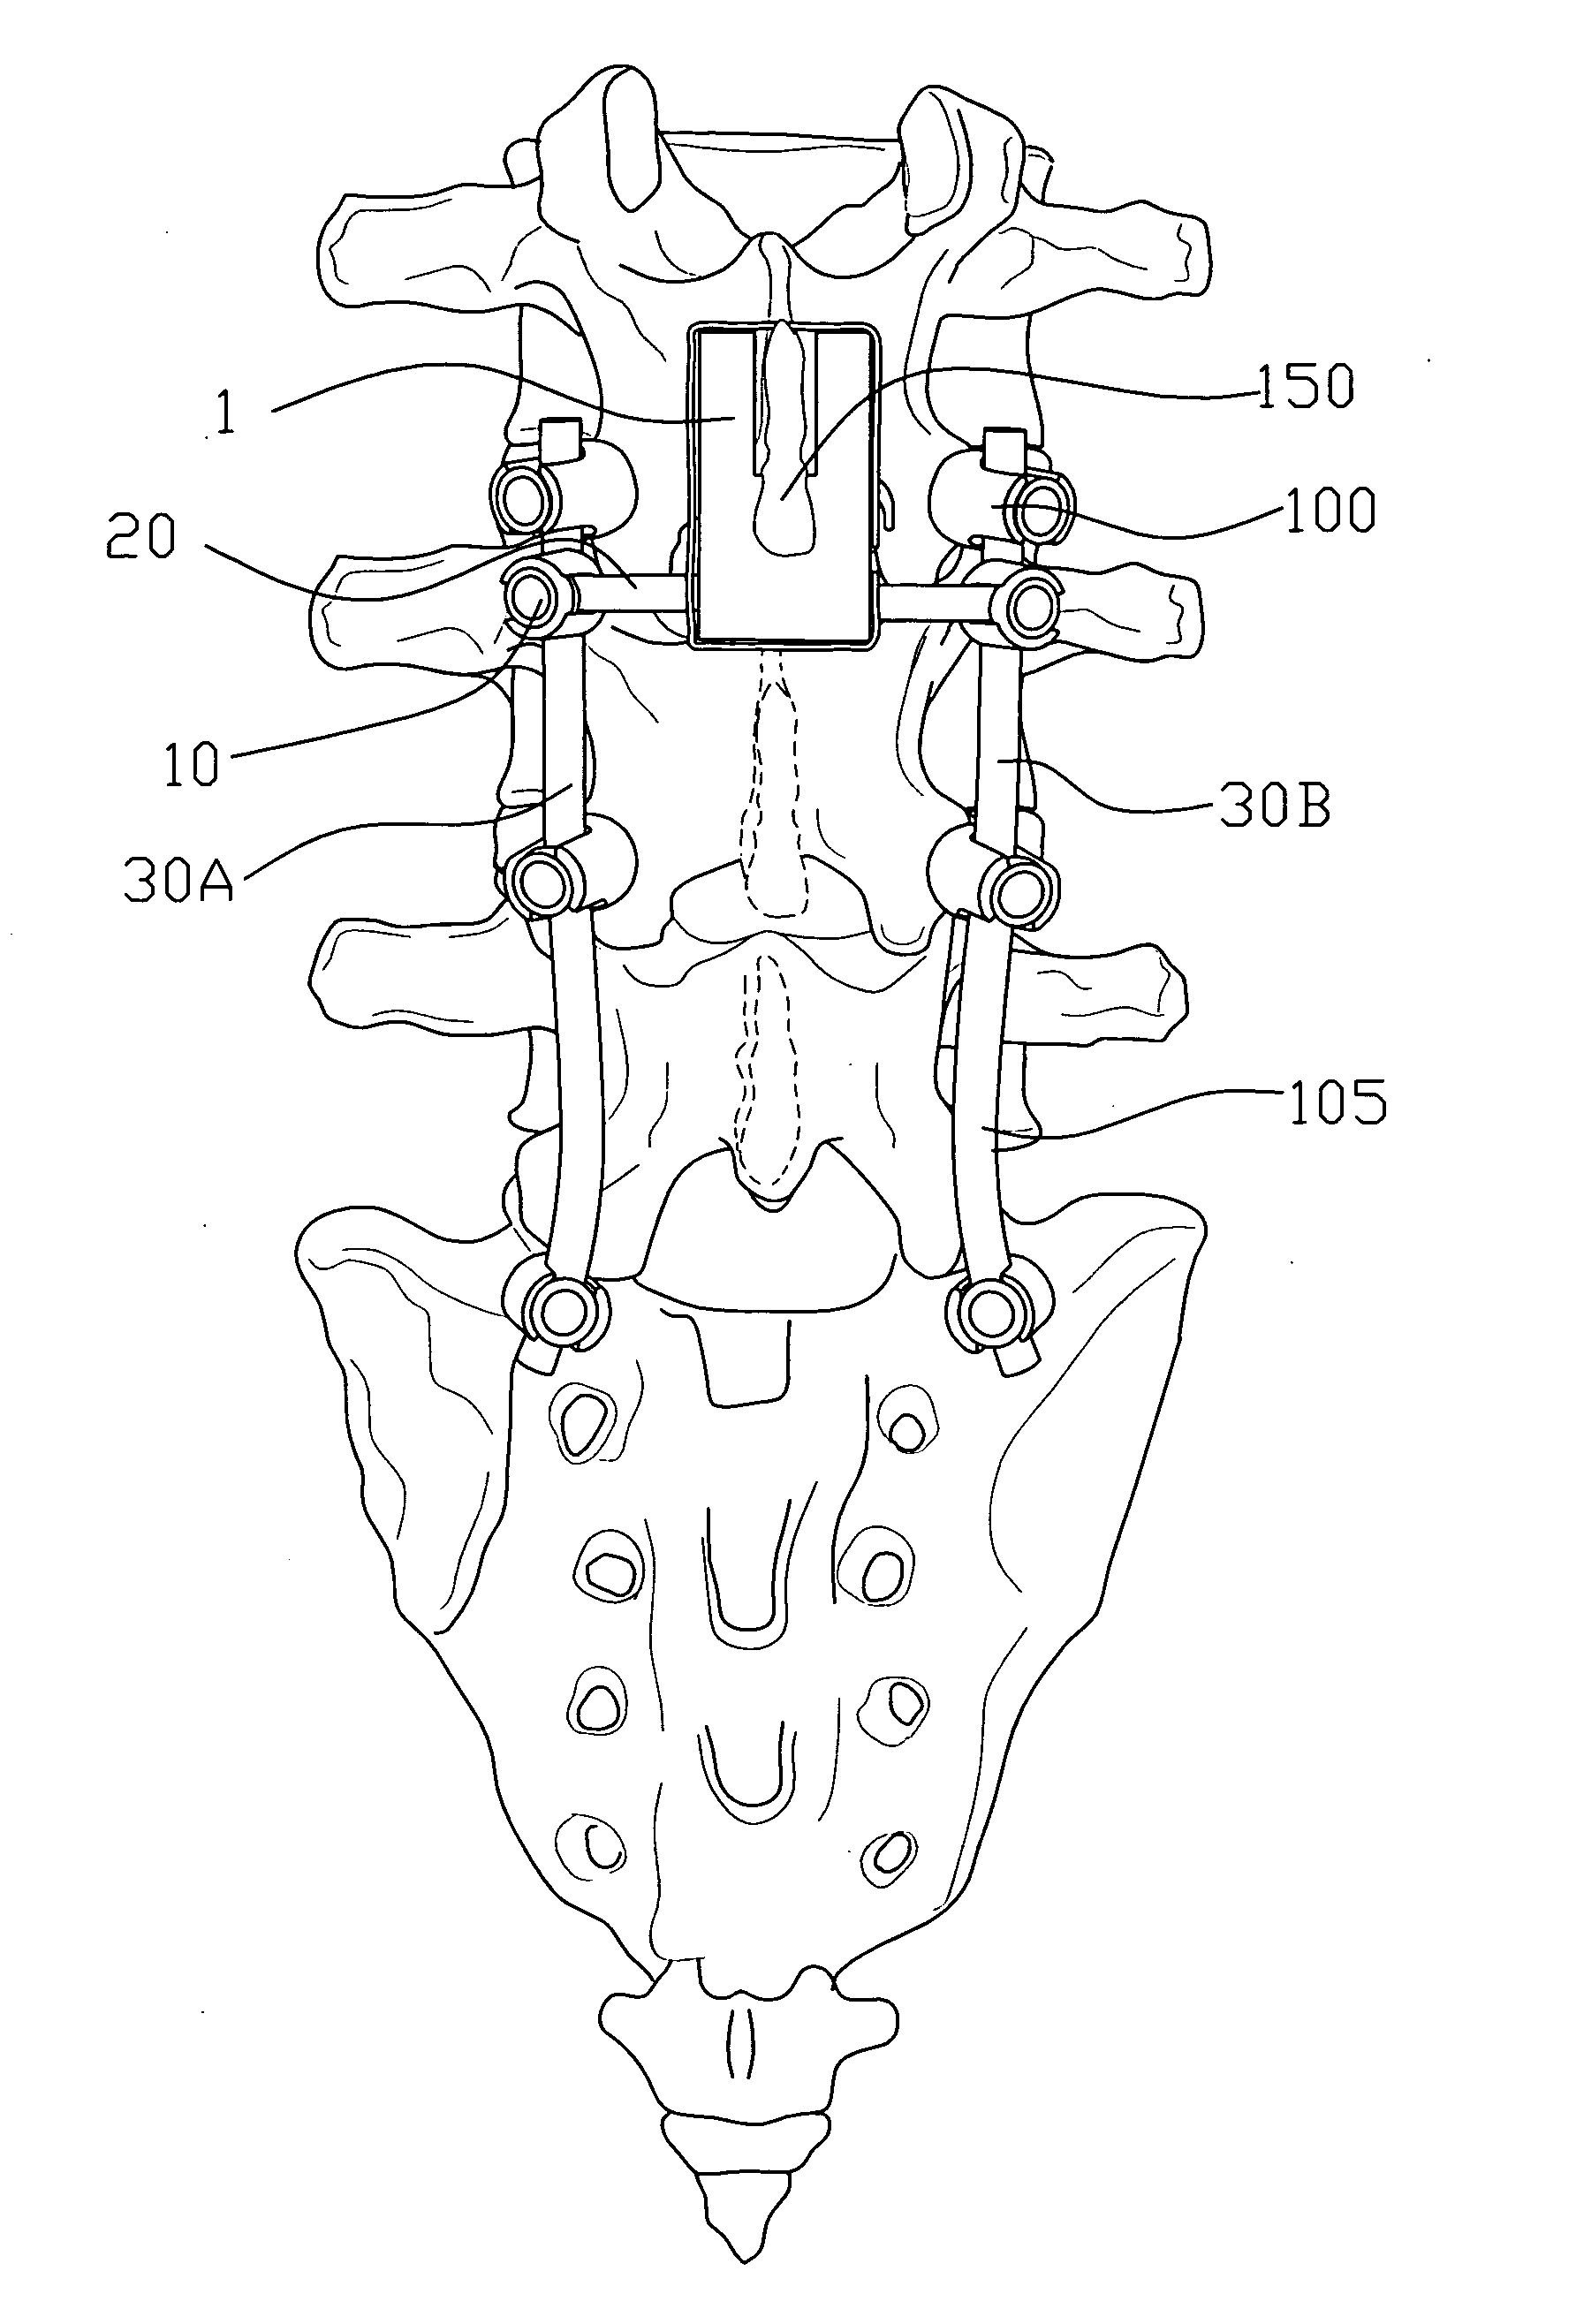 Spinal implant device, procedure and system